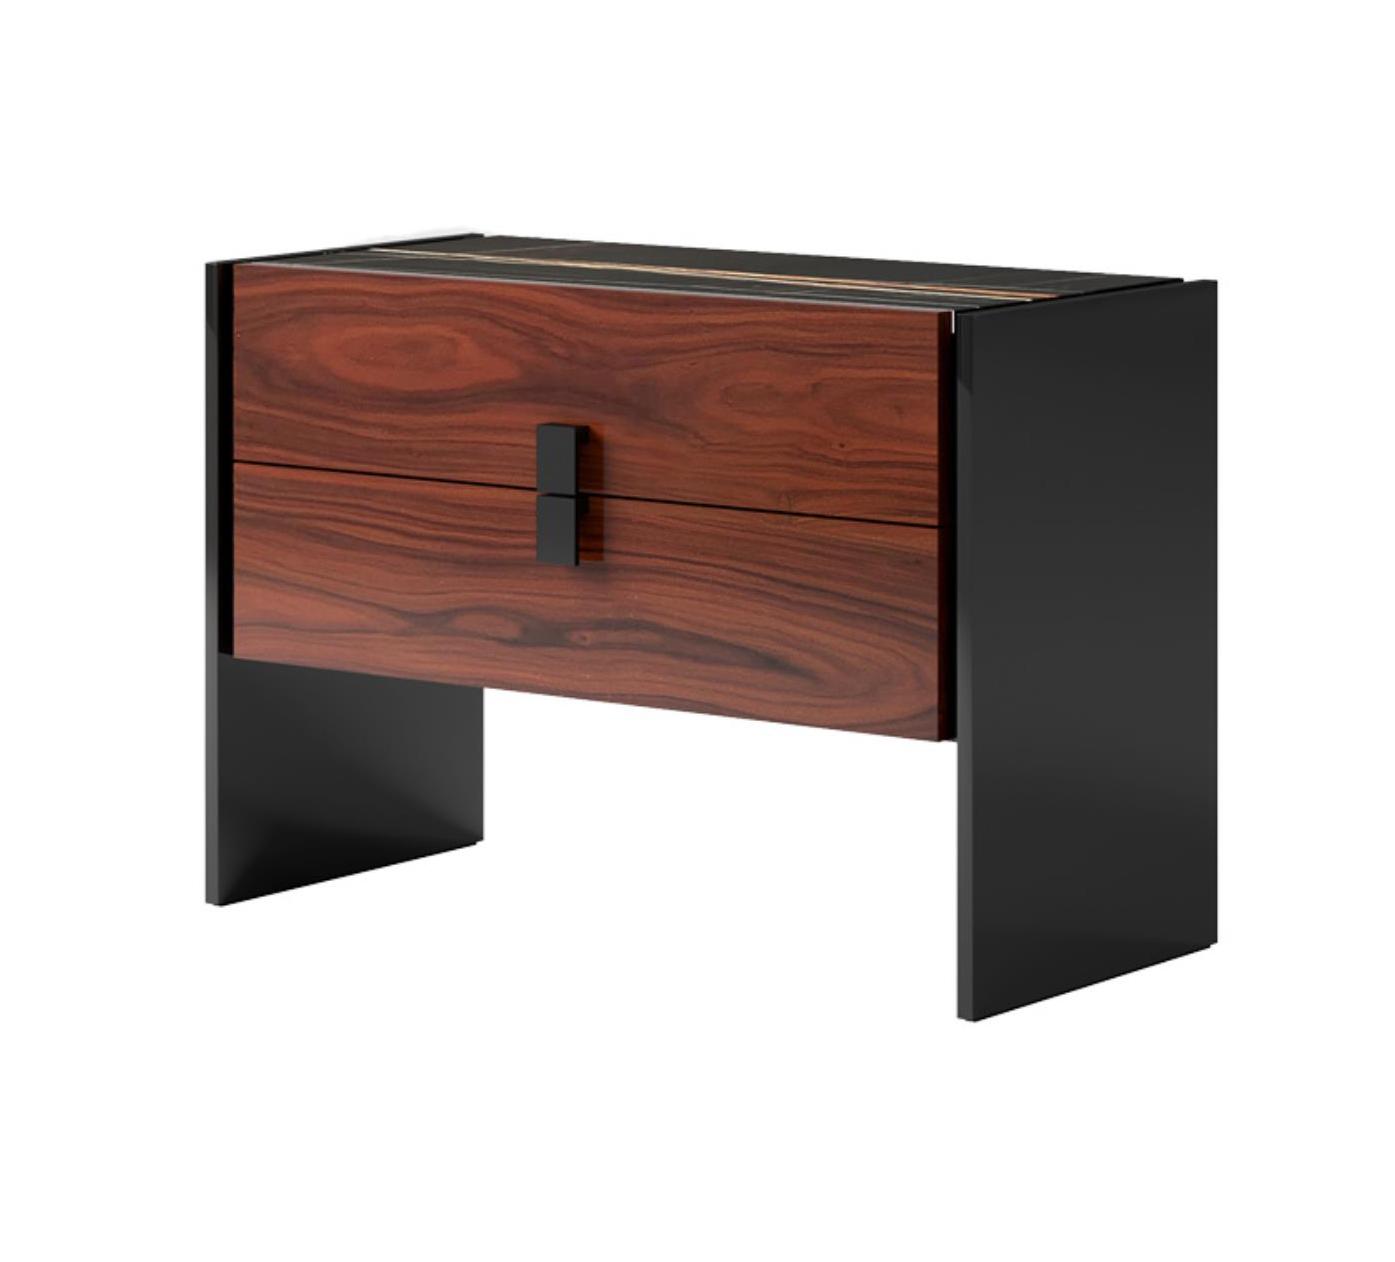 Nightstand With Marble Top